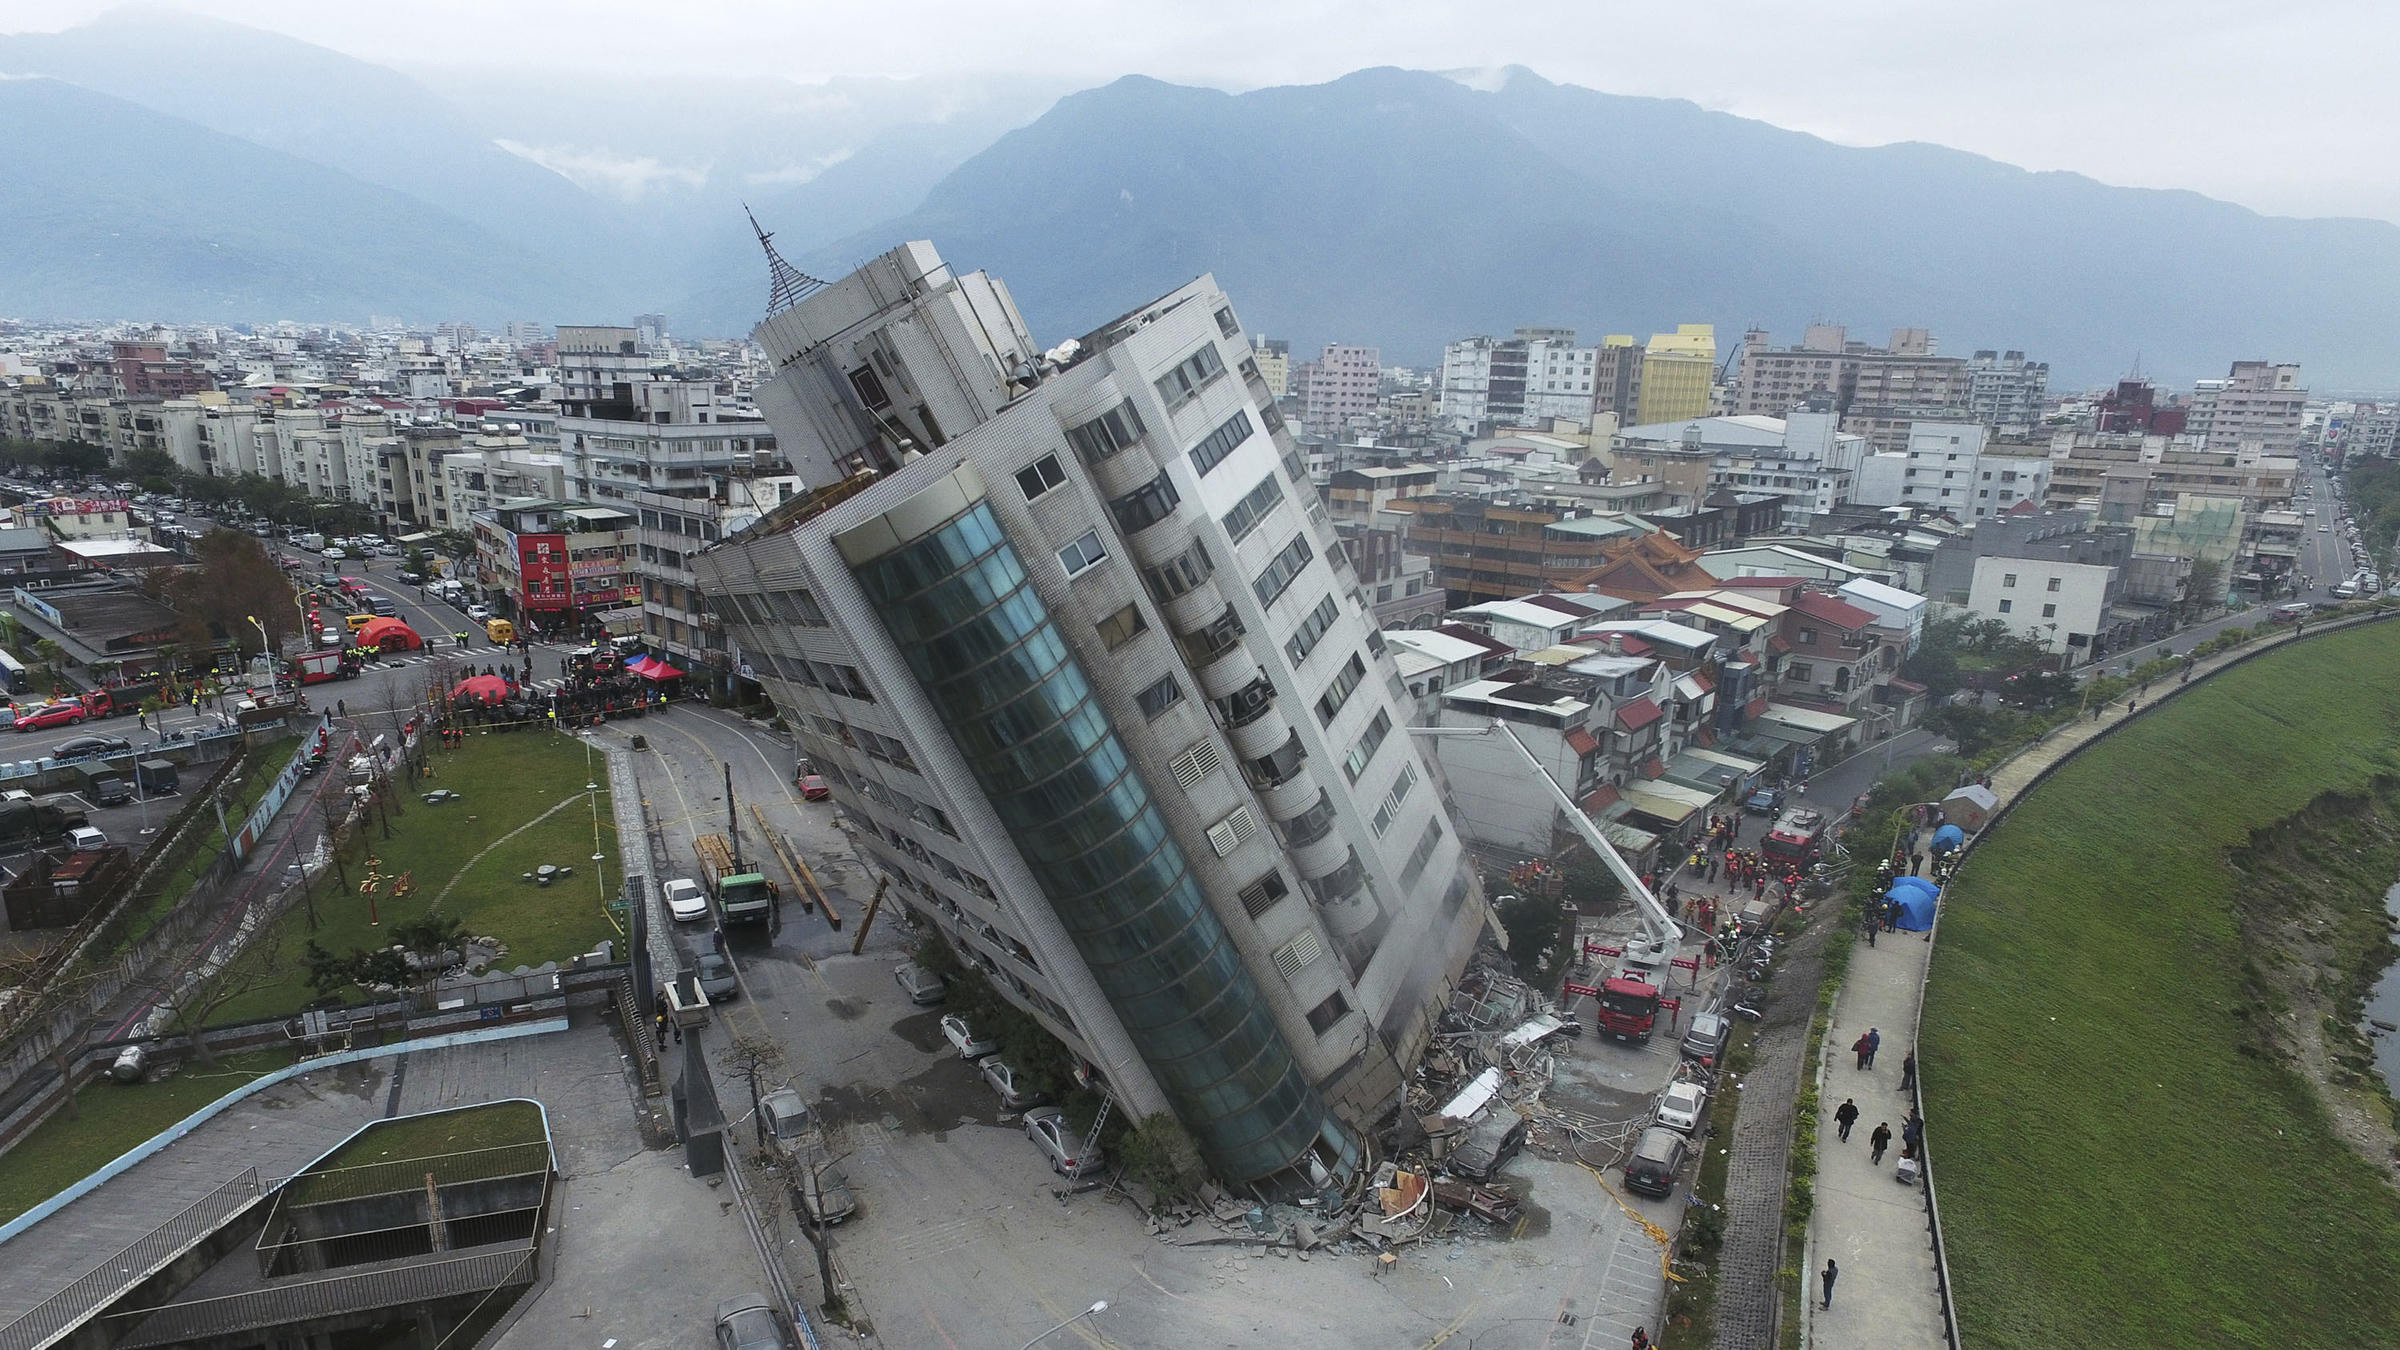 Imagine being on the top floor when your building tips, but doesn't fall.  Feb 2018 earthquake in Hualien, Taiwan (AP Photo)